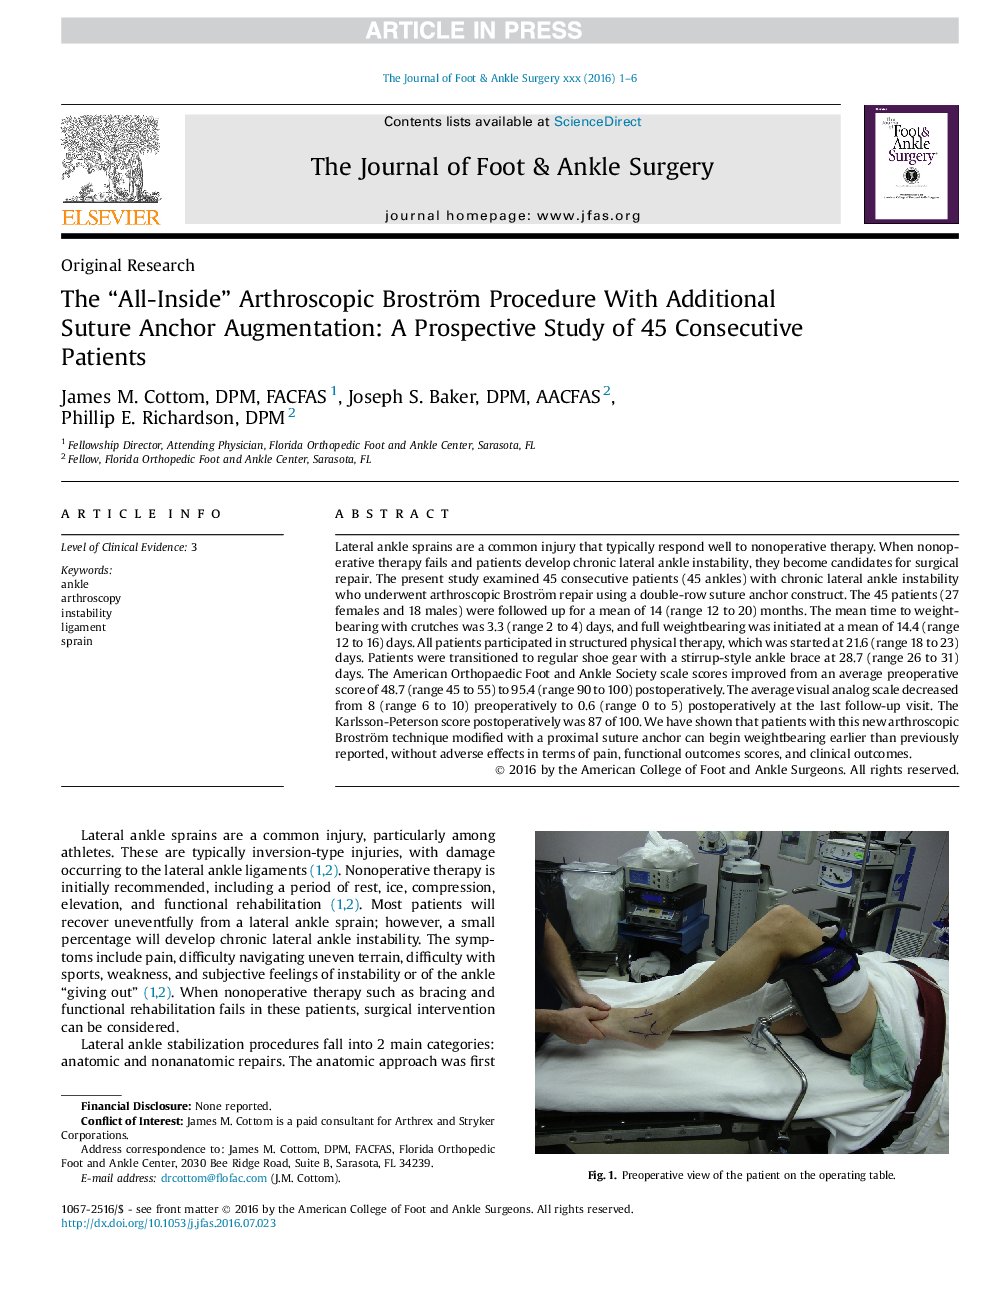 The “All-Inside” Arthroscopic Broström Procedure With Additional Suture Anchor Augmentation: A Prospective Study of 45 Consecutive Patients